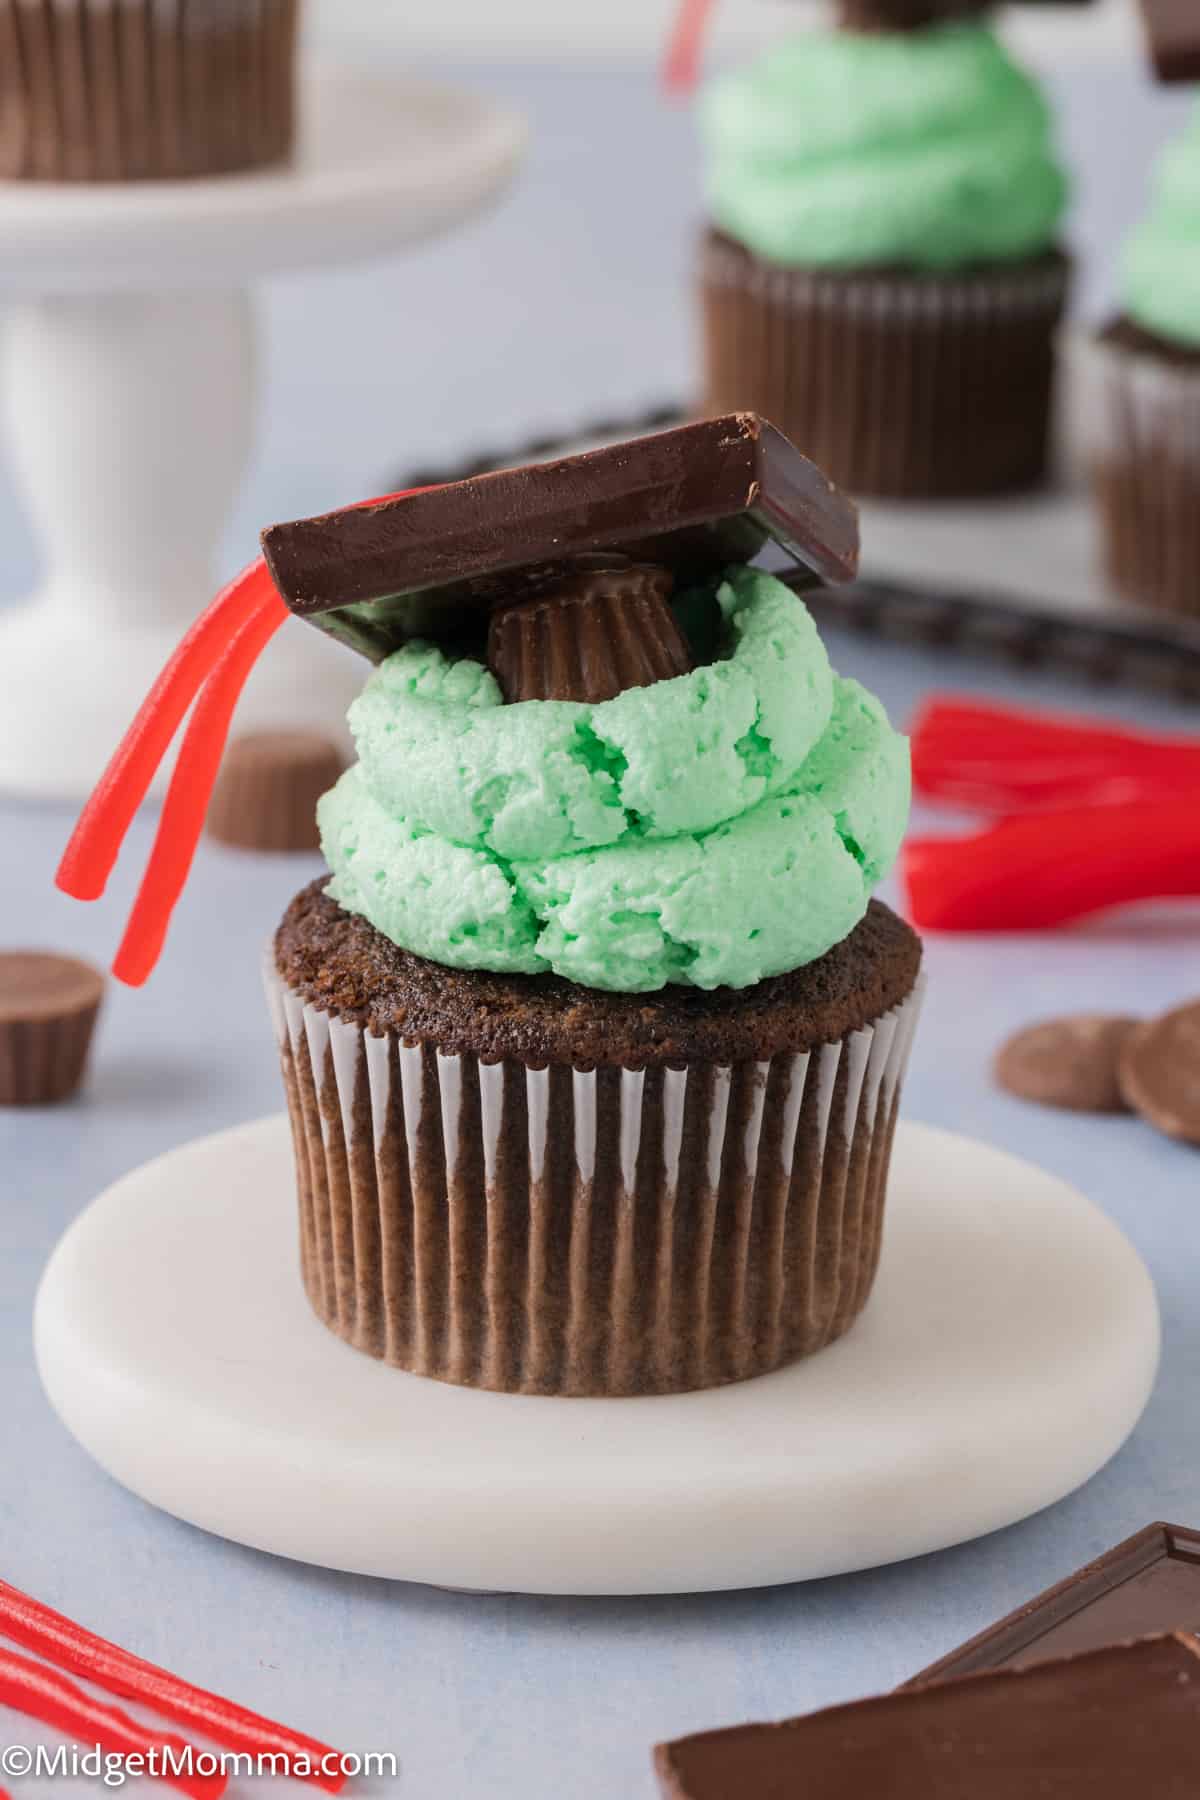 Chocolate cupcakes with green frosting and graduation topper made with peanut butter cups and chocolate squares.